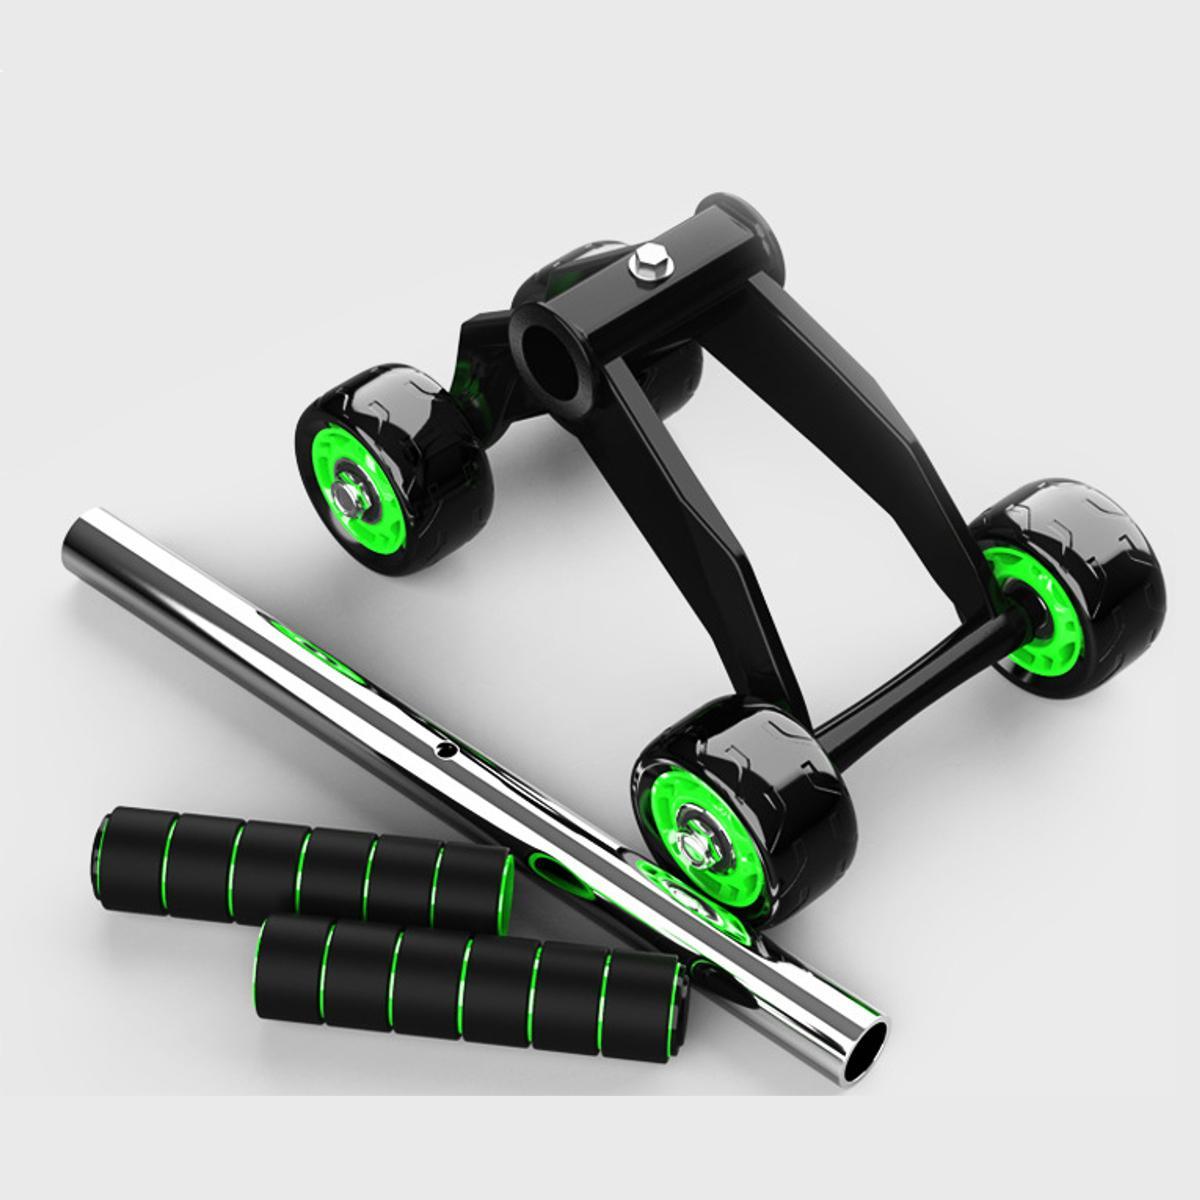 4 Wheels Abdominal Muscle Roller Exercise Equipment